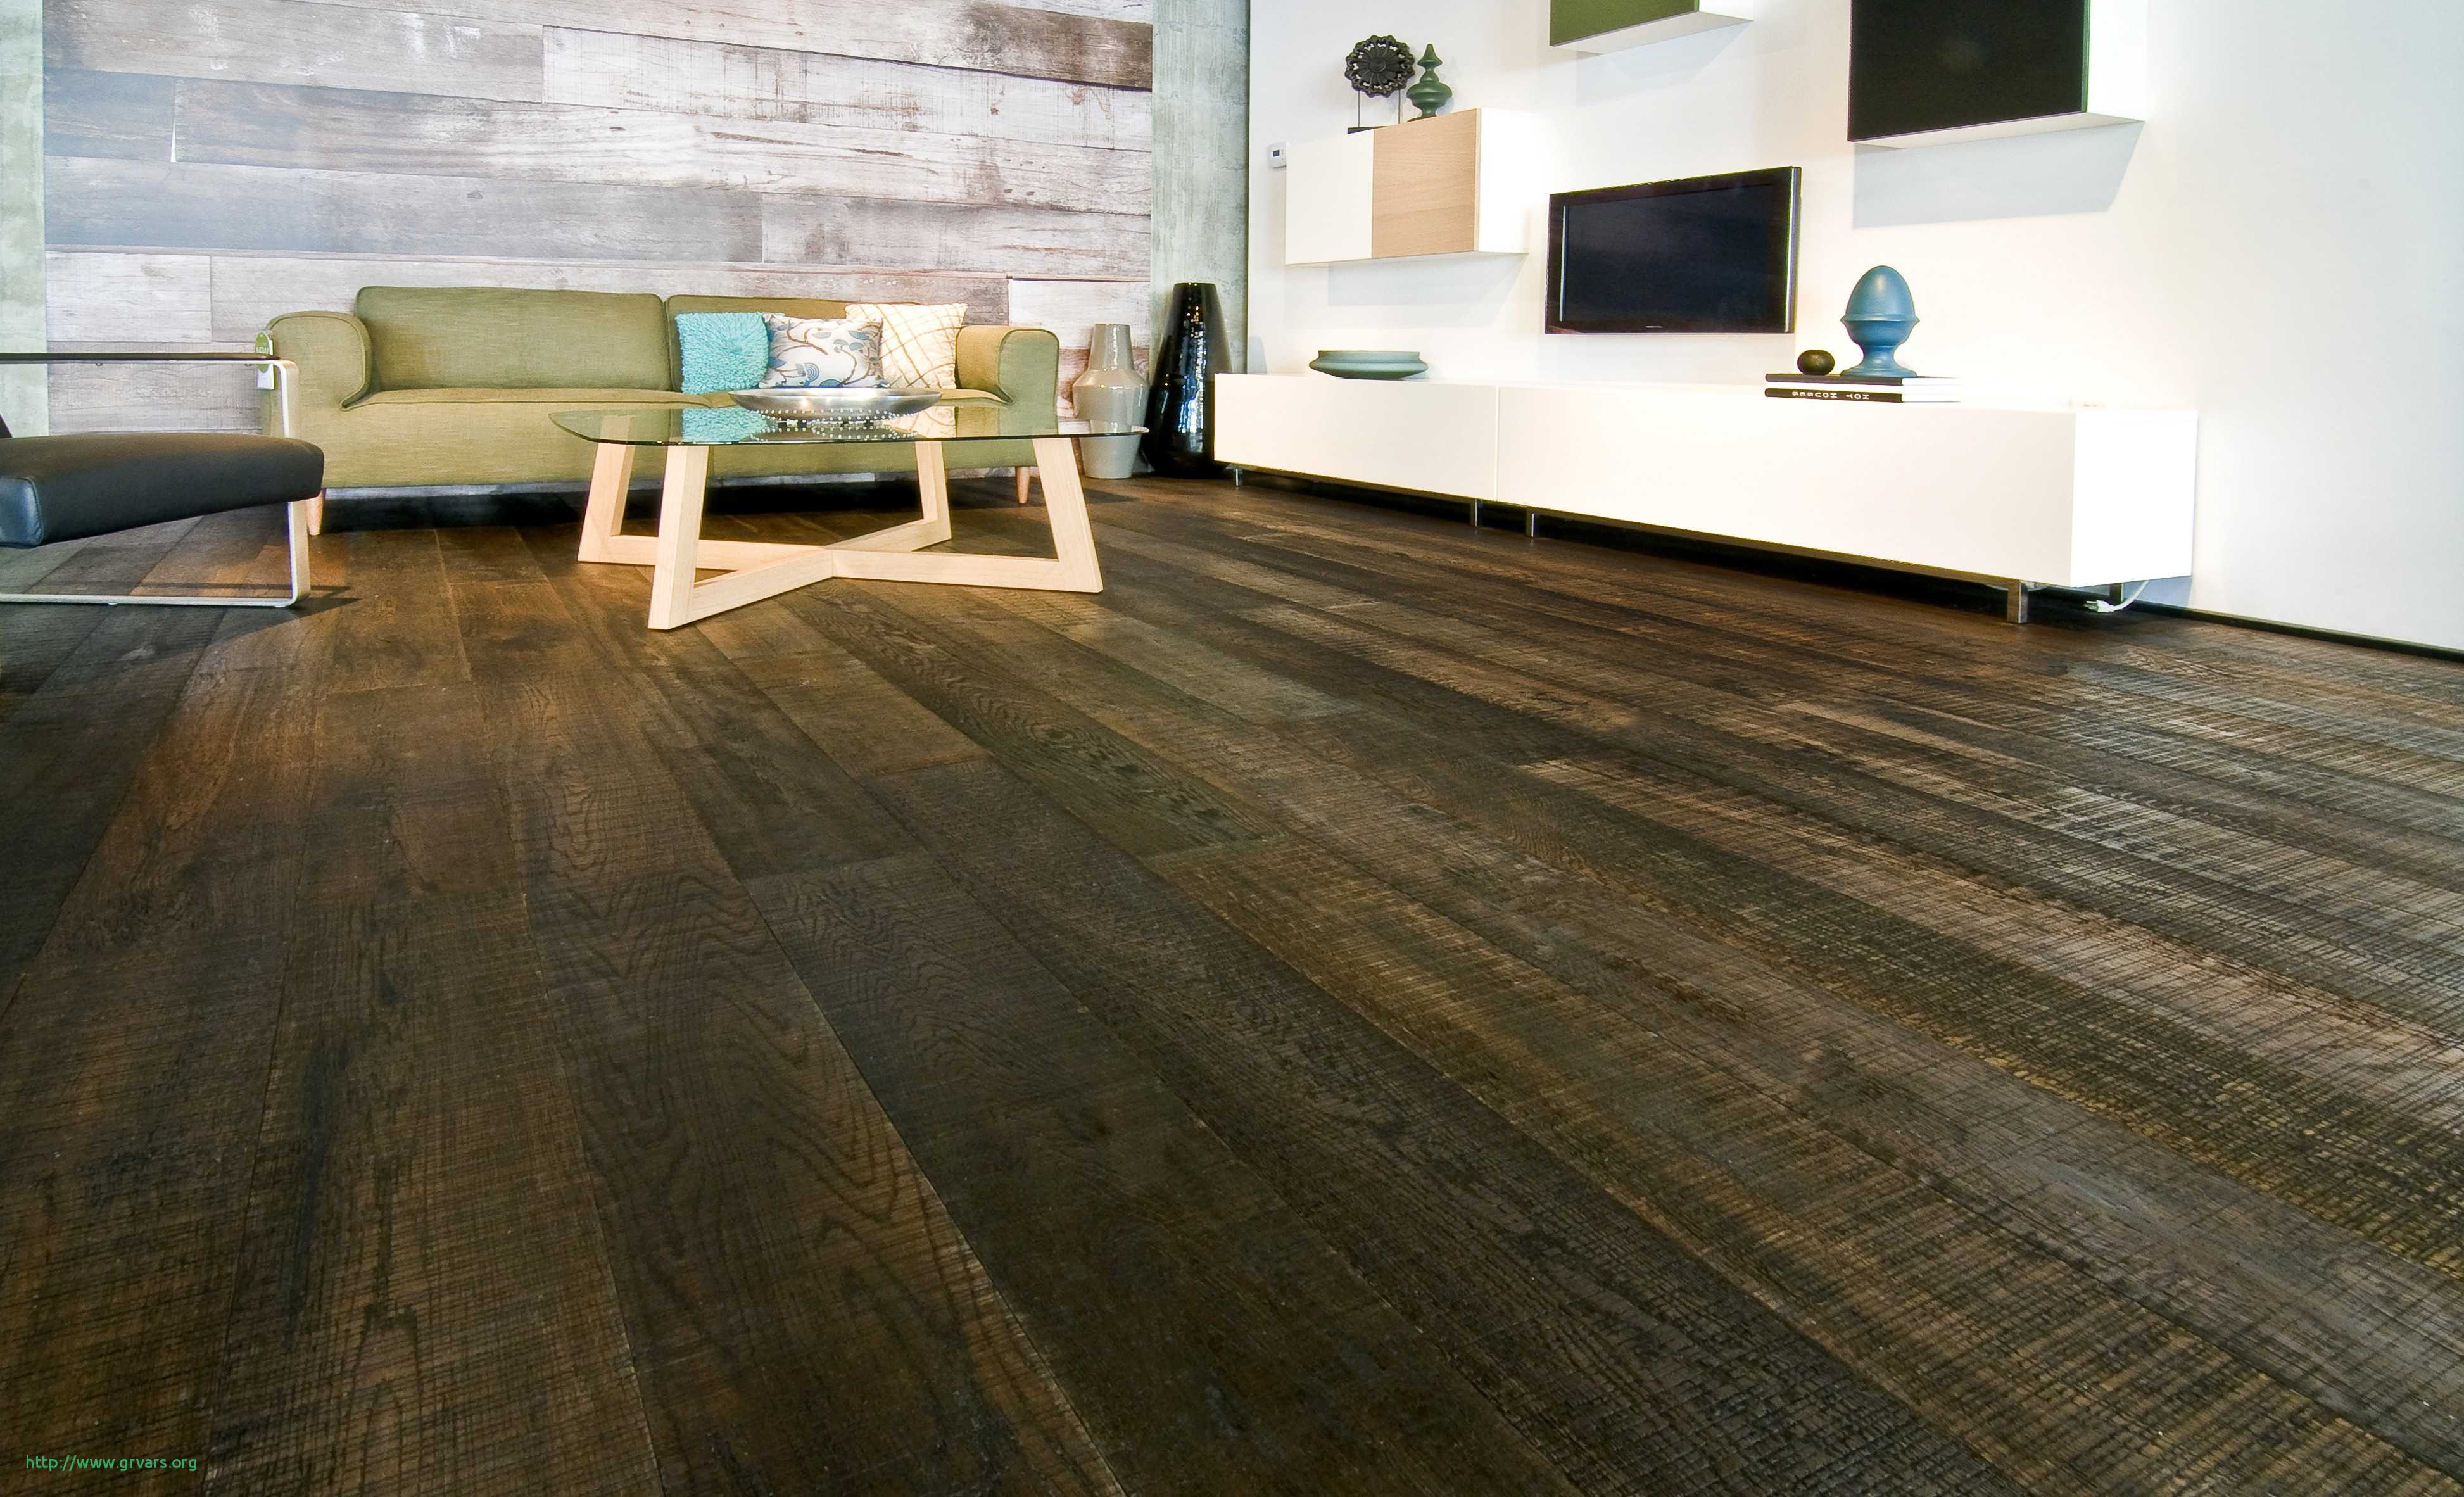 11 Recommended Spotted Gum Hardwood Flooring Prices 2024 free download spotted gum hardwood flooring prices of cheapest flooring toronto wikizie co inside 21 beau cheapest hardwood flooring in toronto ideas blog